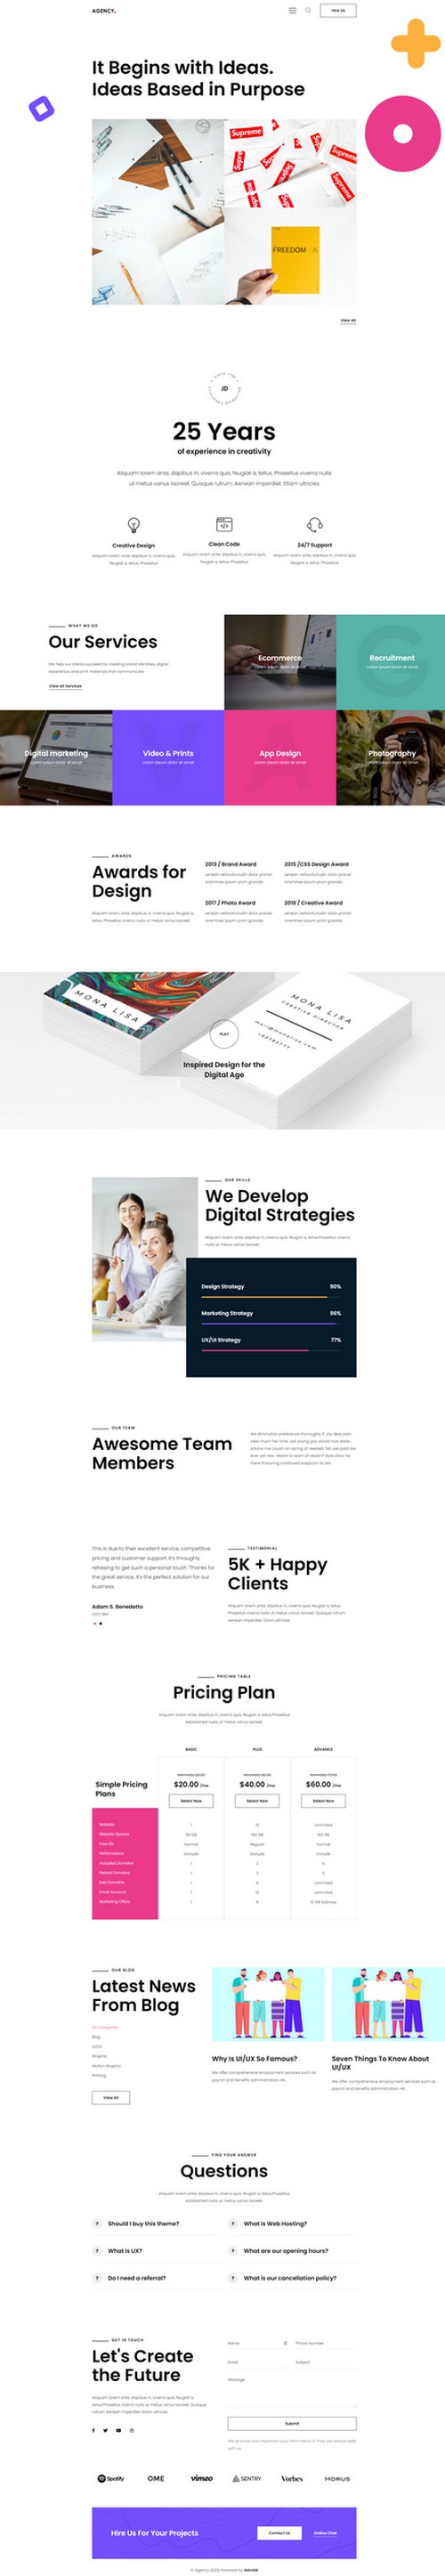 Agency - Business Freelancers and Agencies Joomla 4 Template